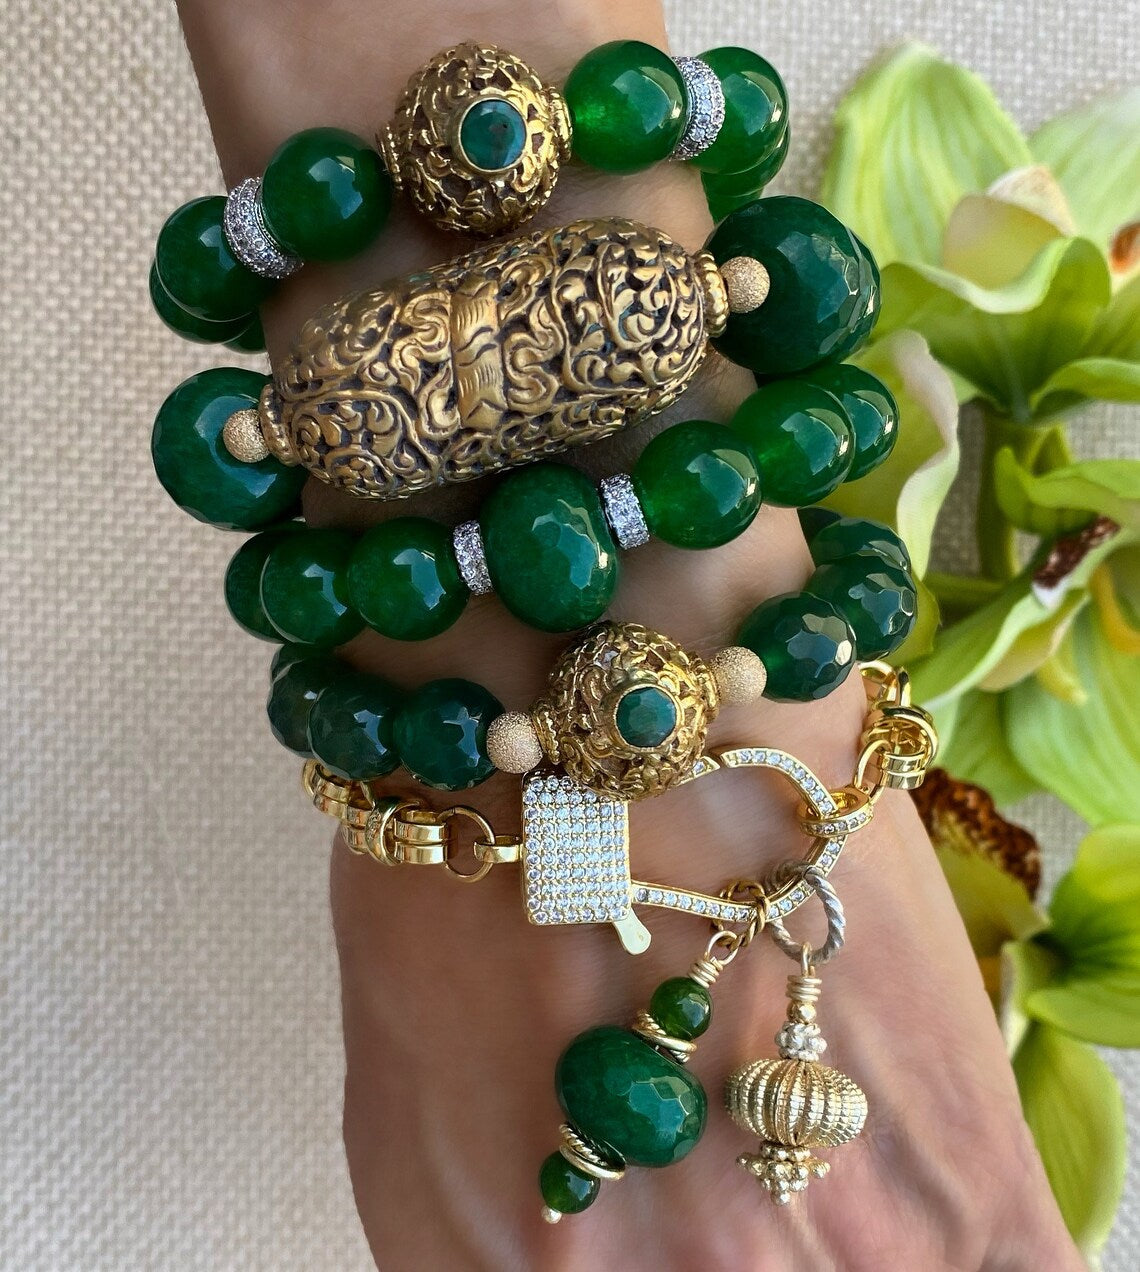 Boho Luxe Green Onyx with Emerald Tibetan Repousse Focal Bead